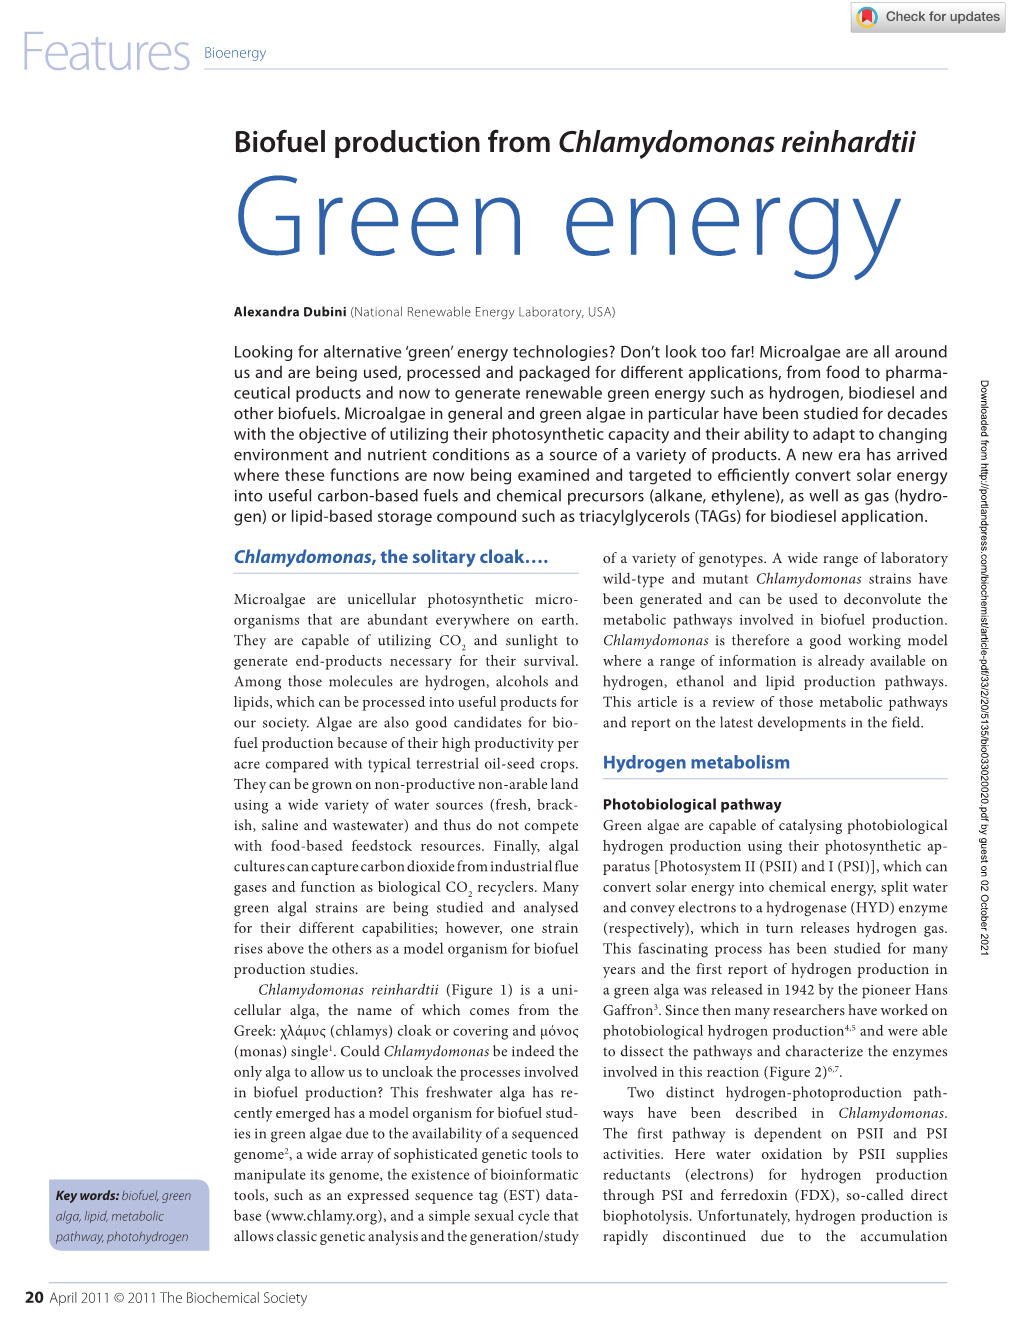 Green Energy from Green Algae: Biofuel Production From